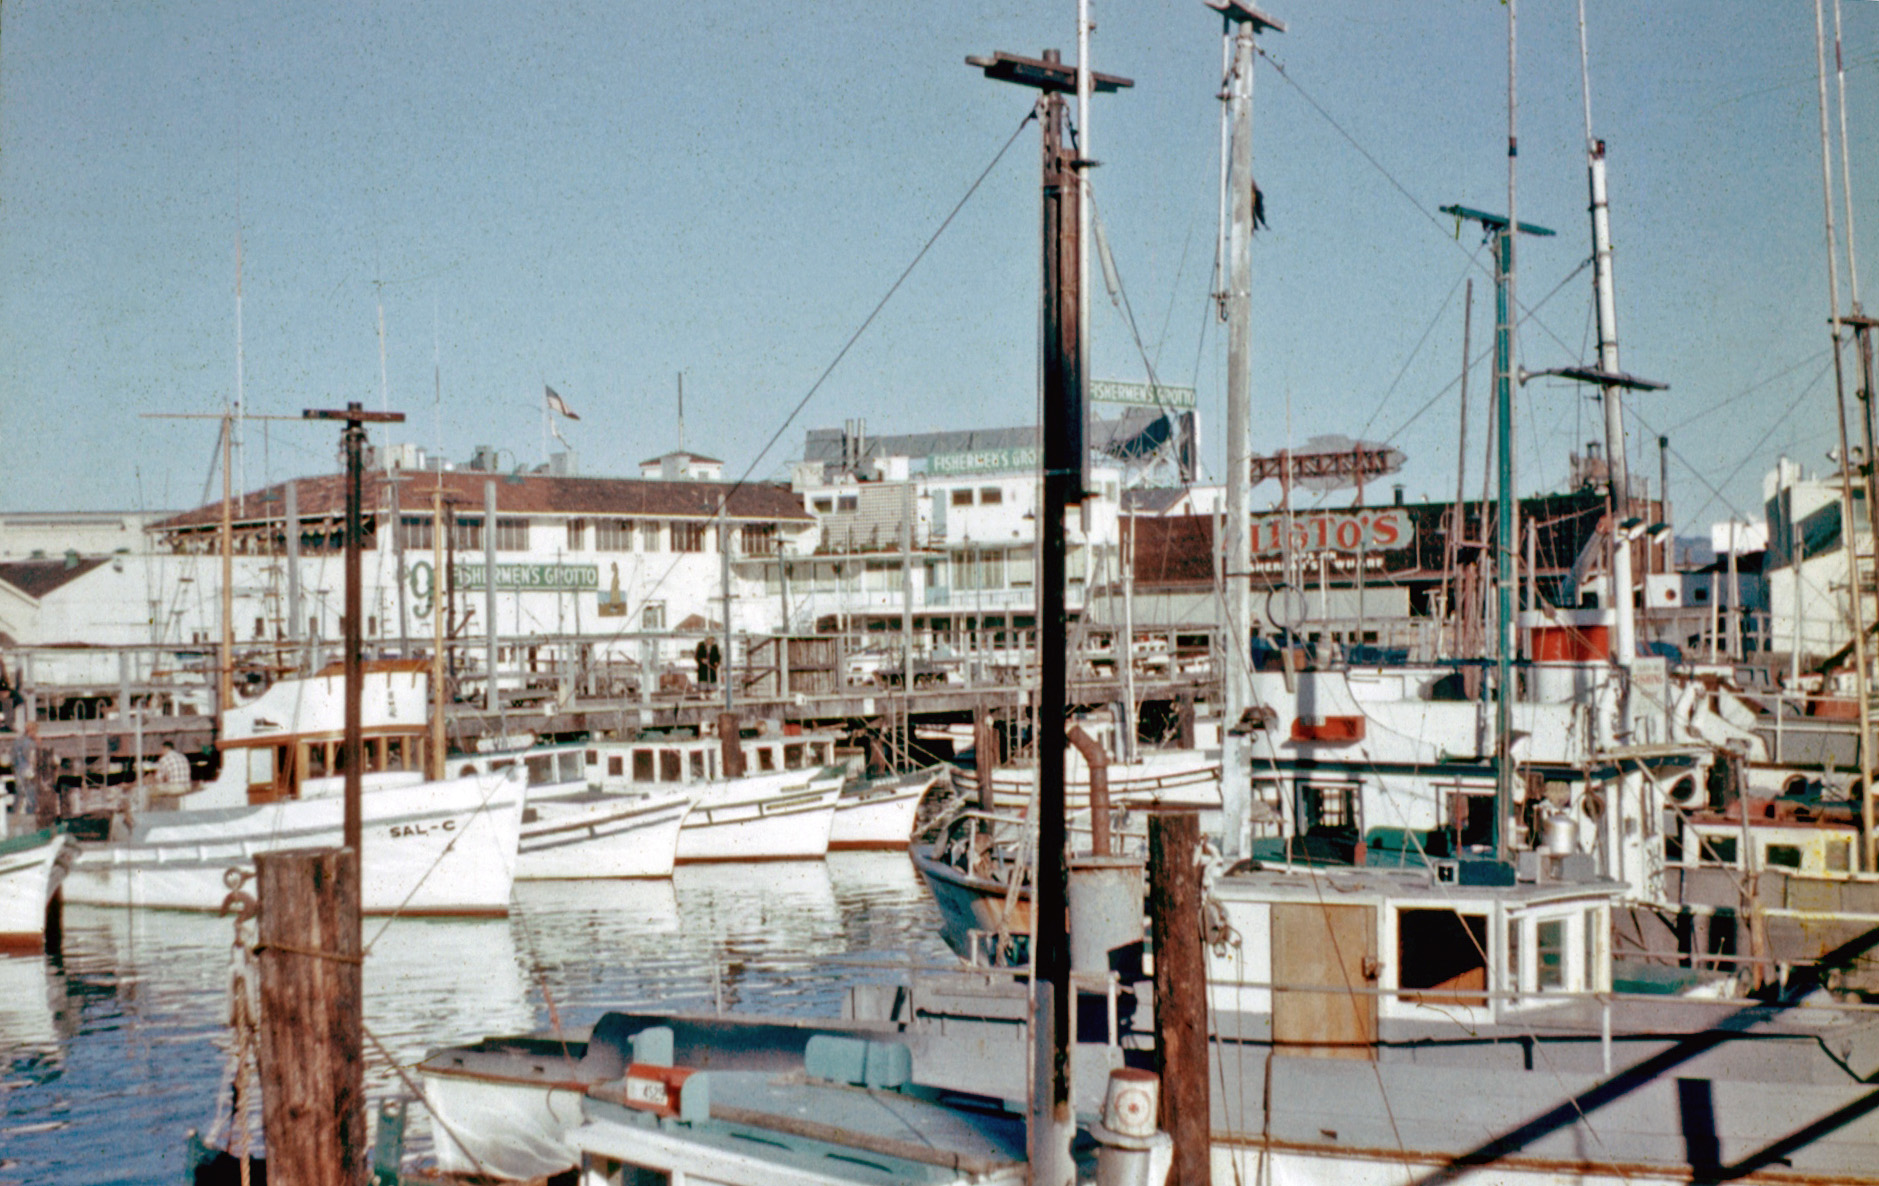 Fisherman's Wharf in San Francisco, circa 1958. This was a popular spot even back then, but has really undergone a Renaissance in recent years! View full size.